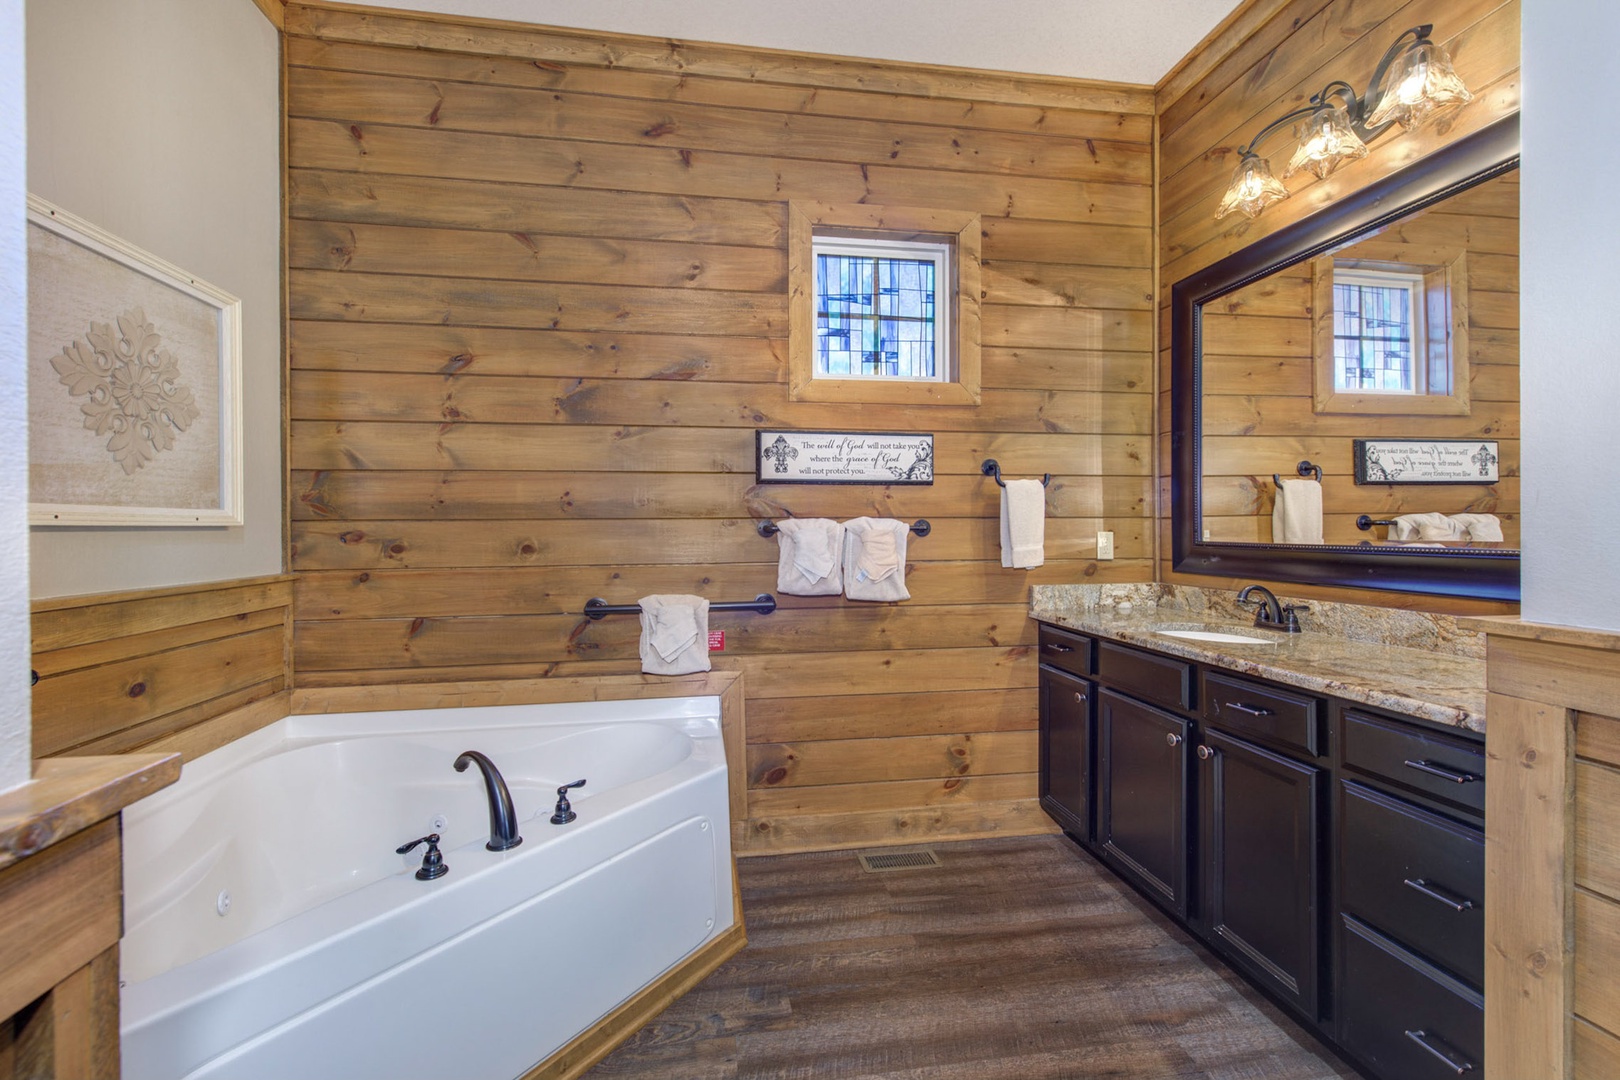 This ensuite bath offers an oversized vanity, shower, & soaking tub